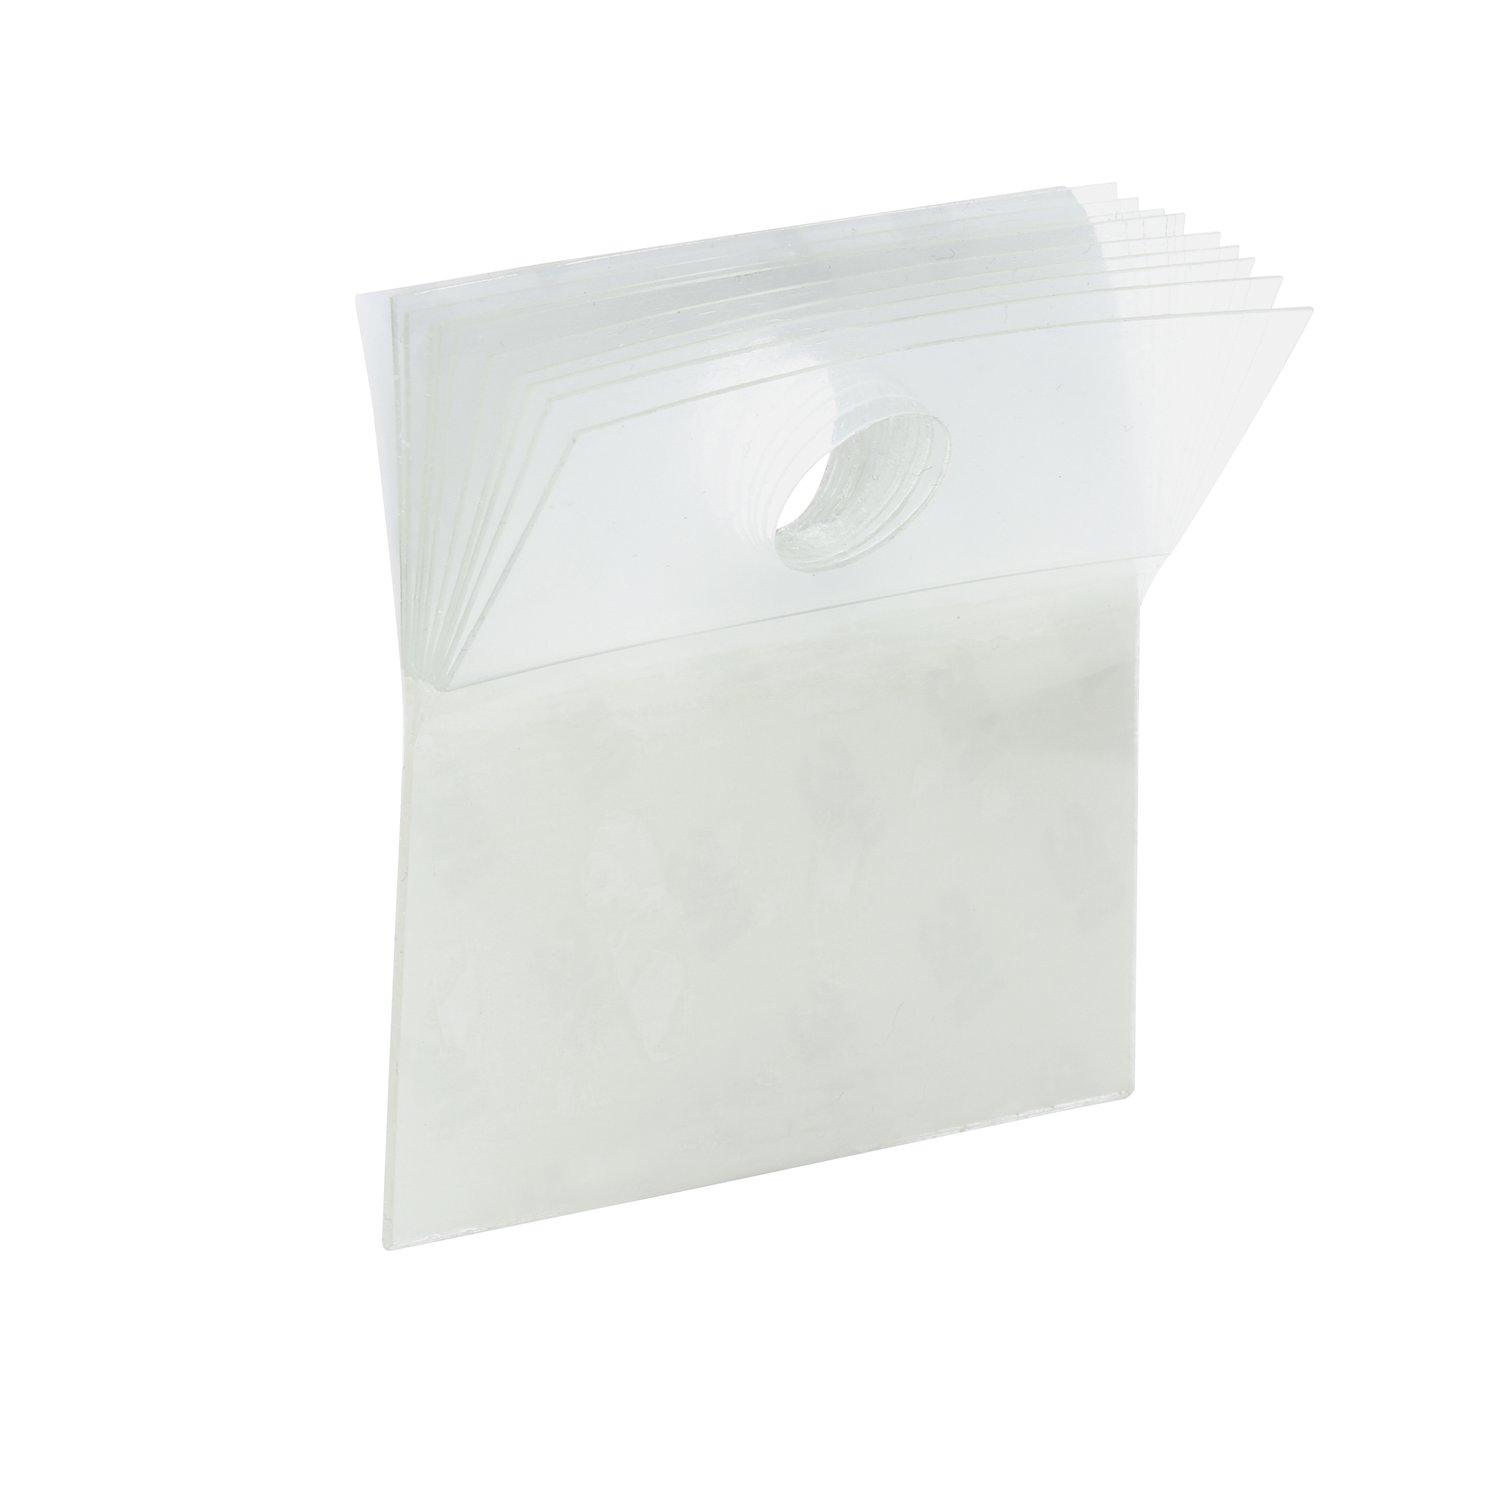 7010375609 - 3M Hang Tab 1076, Clear, 2 in x 2 in, 5 Pack/Case, Conveniently
Packaged